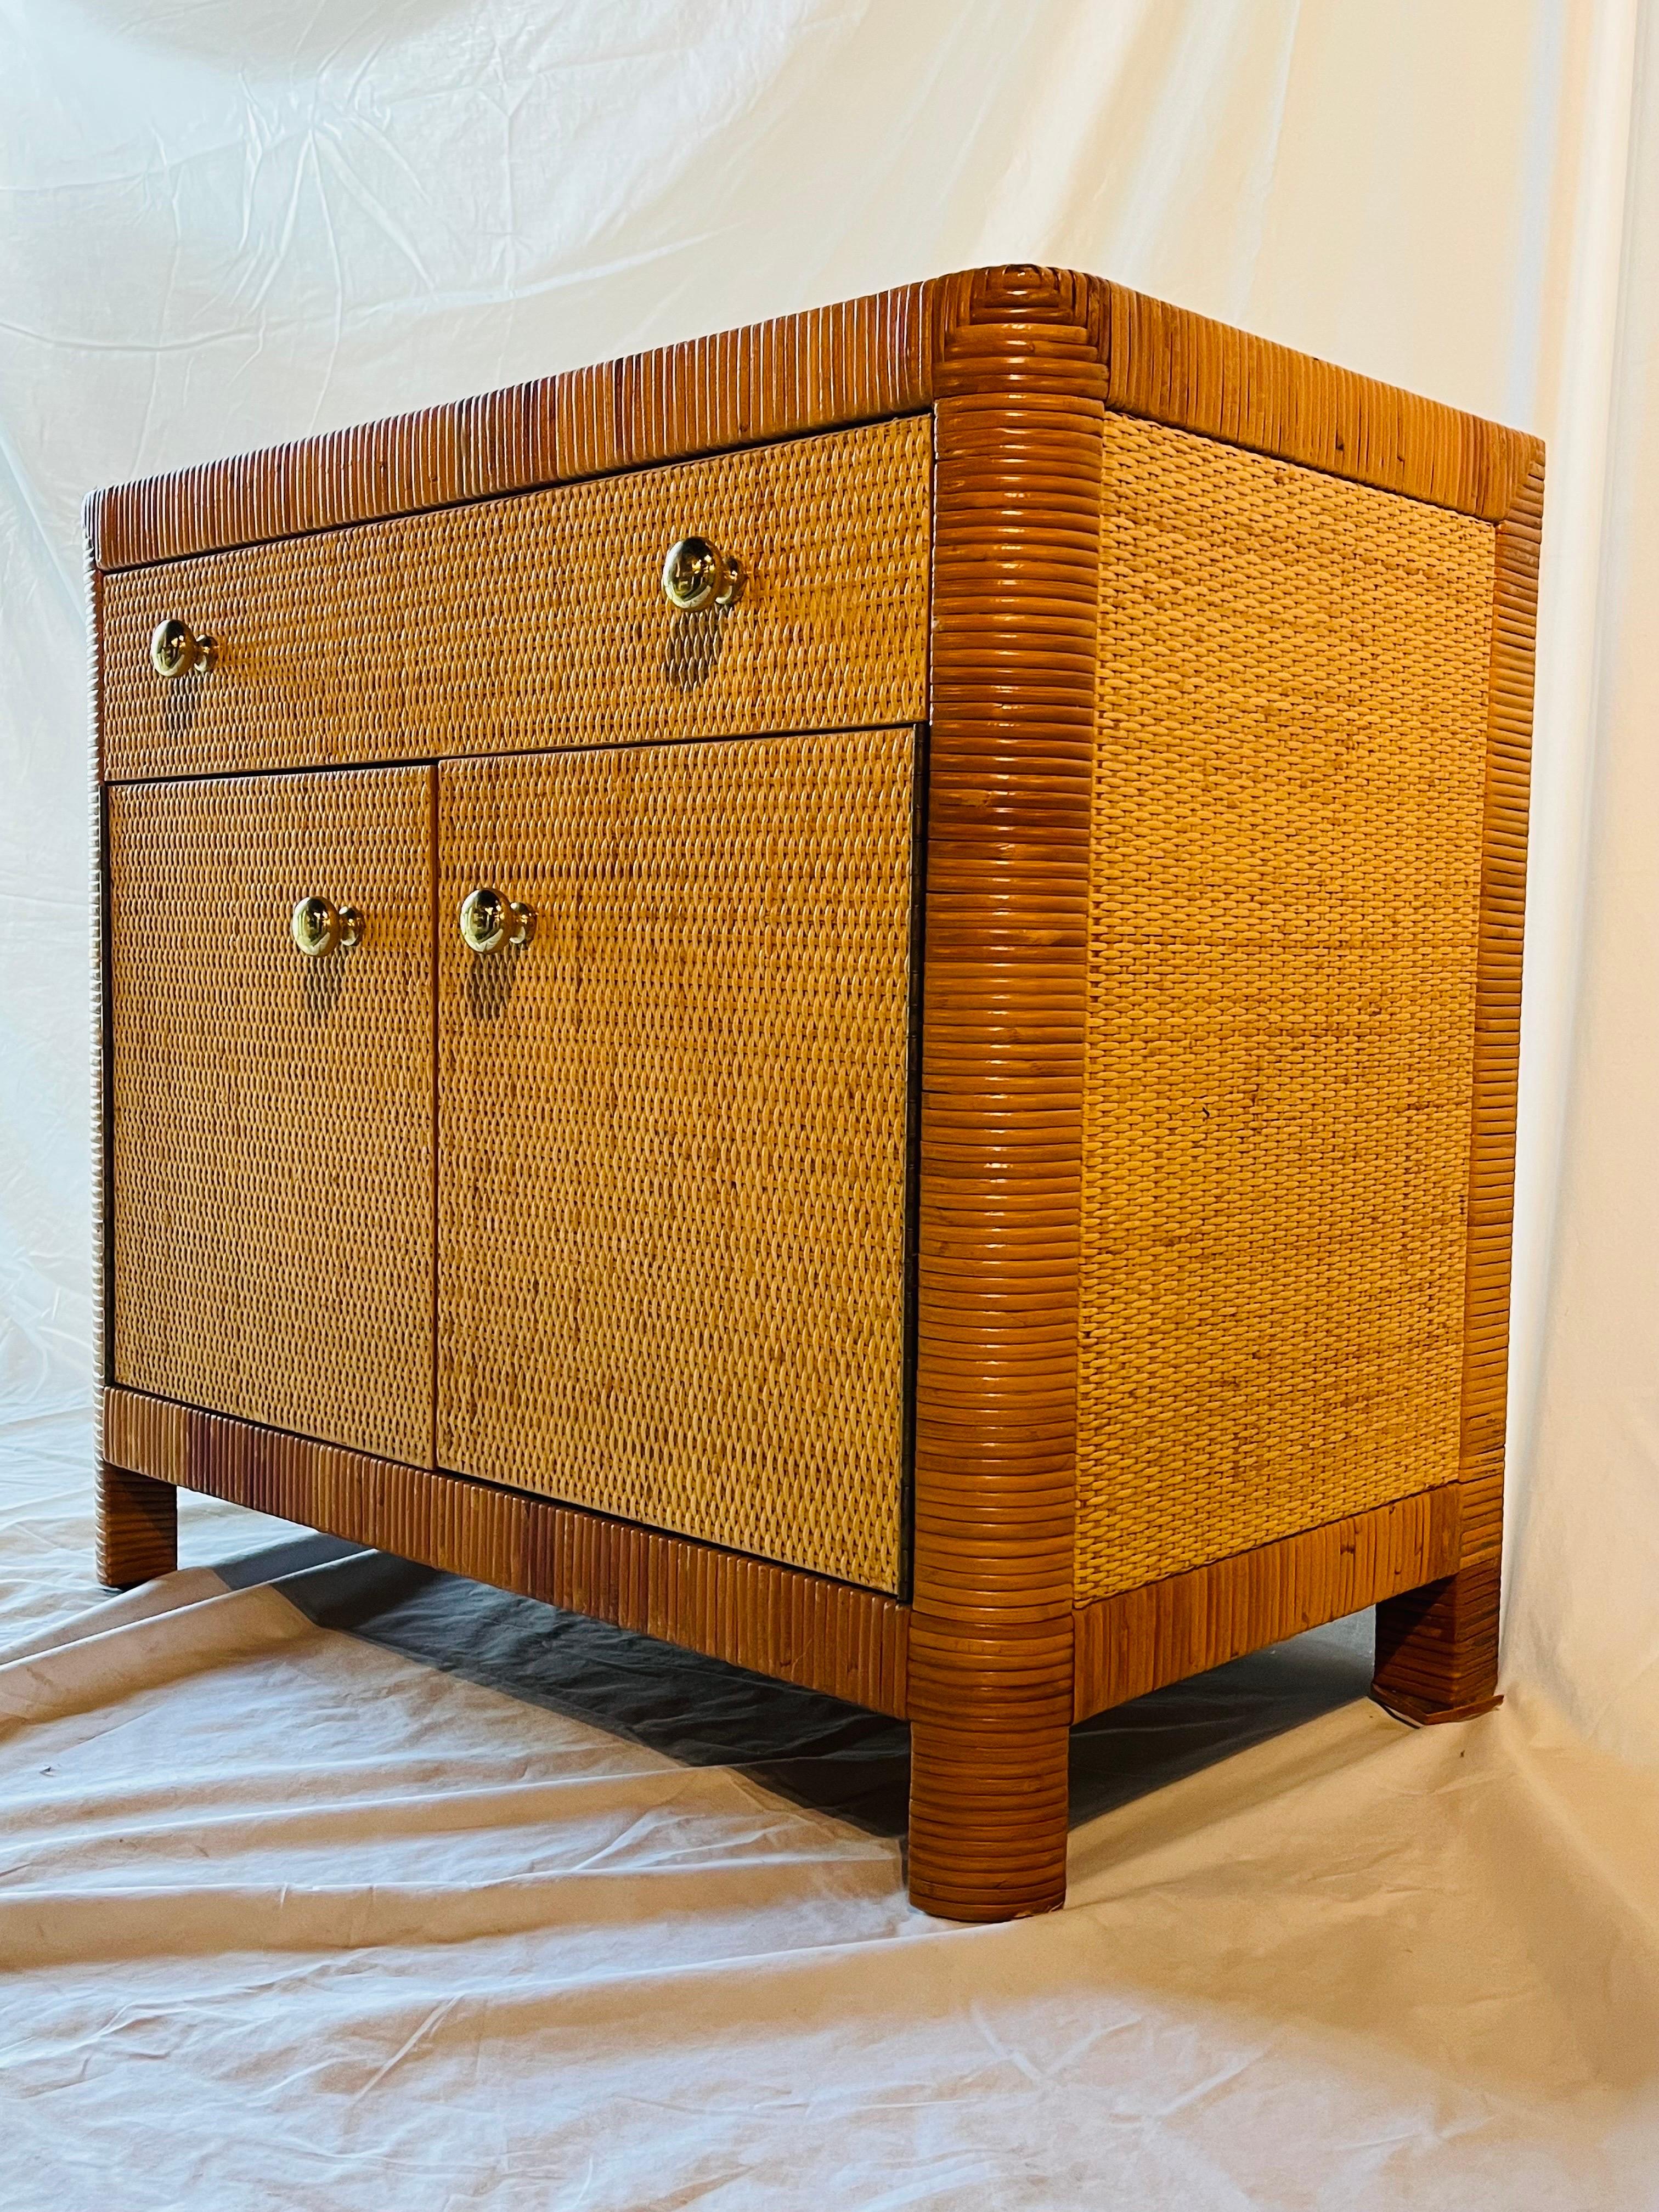 A vintage marked and documented Bielecky Brothers wrapped rattan and cane chest, night stand or cabinet with two doors and one drawer. Bielecky Brothers has a long history in the United States, starting in 1903 when the Bielecky Brothers emigrated